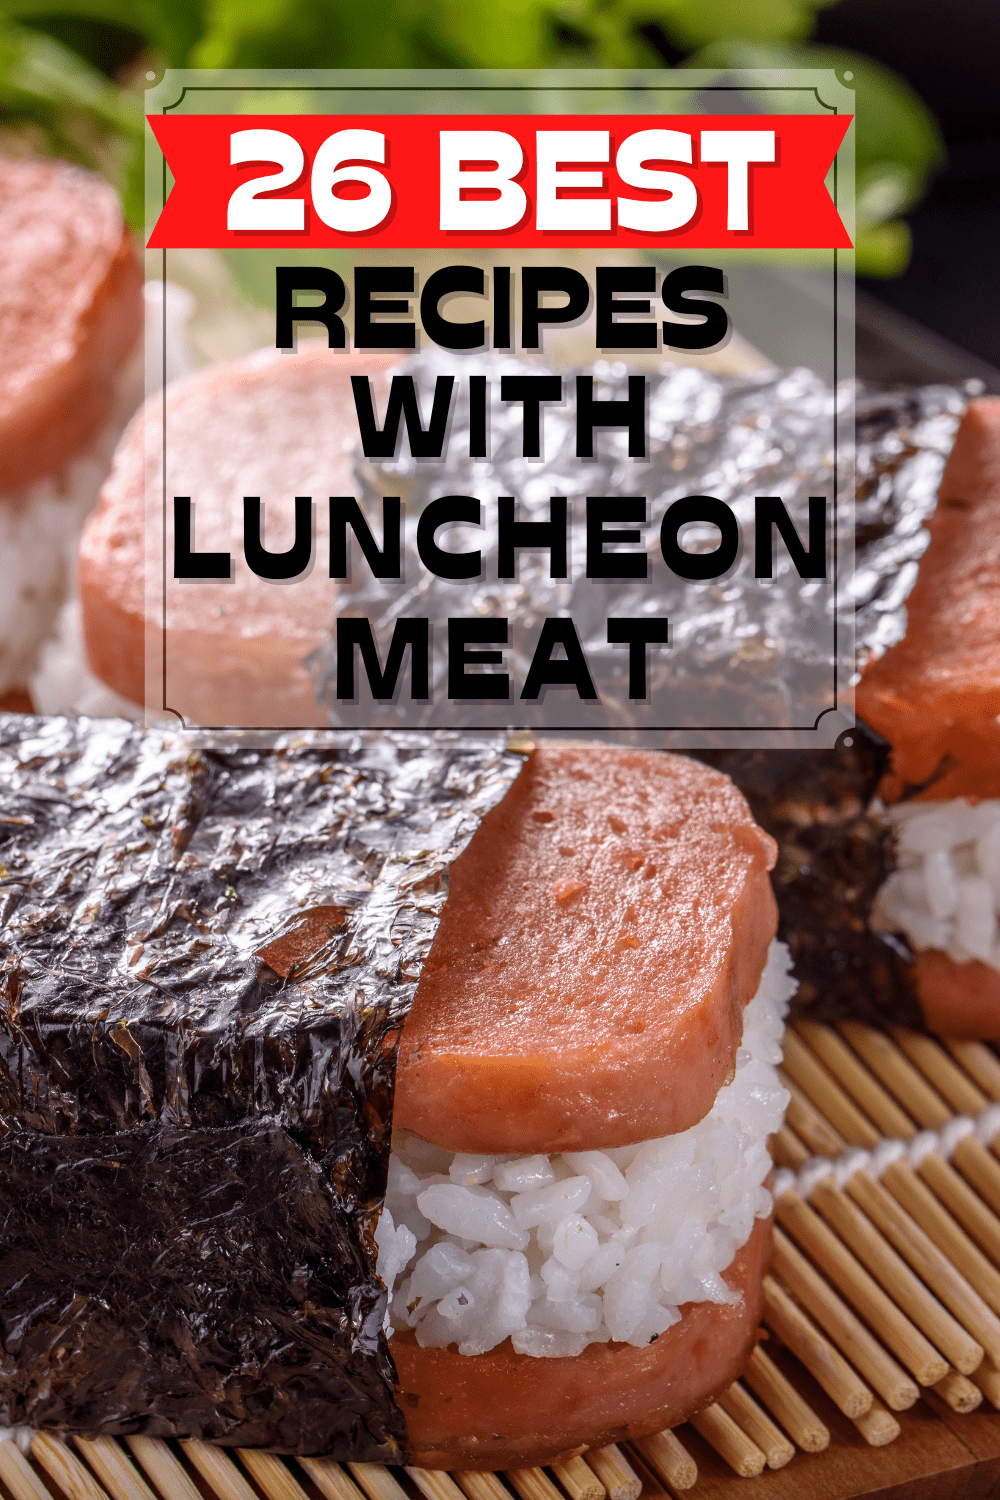 Discover the countless possibilities of cooking with luncheon meat! Explore new recipes and combinations from appetizers to main courses. via @mystayathome